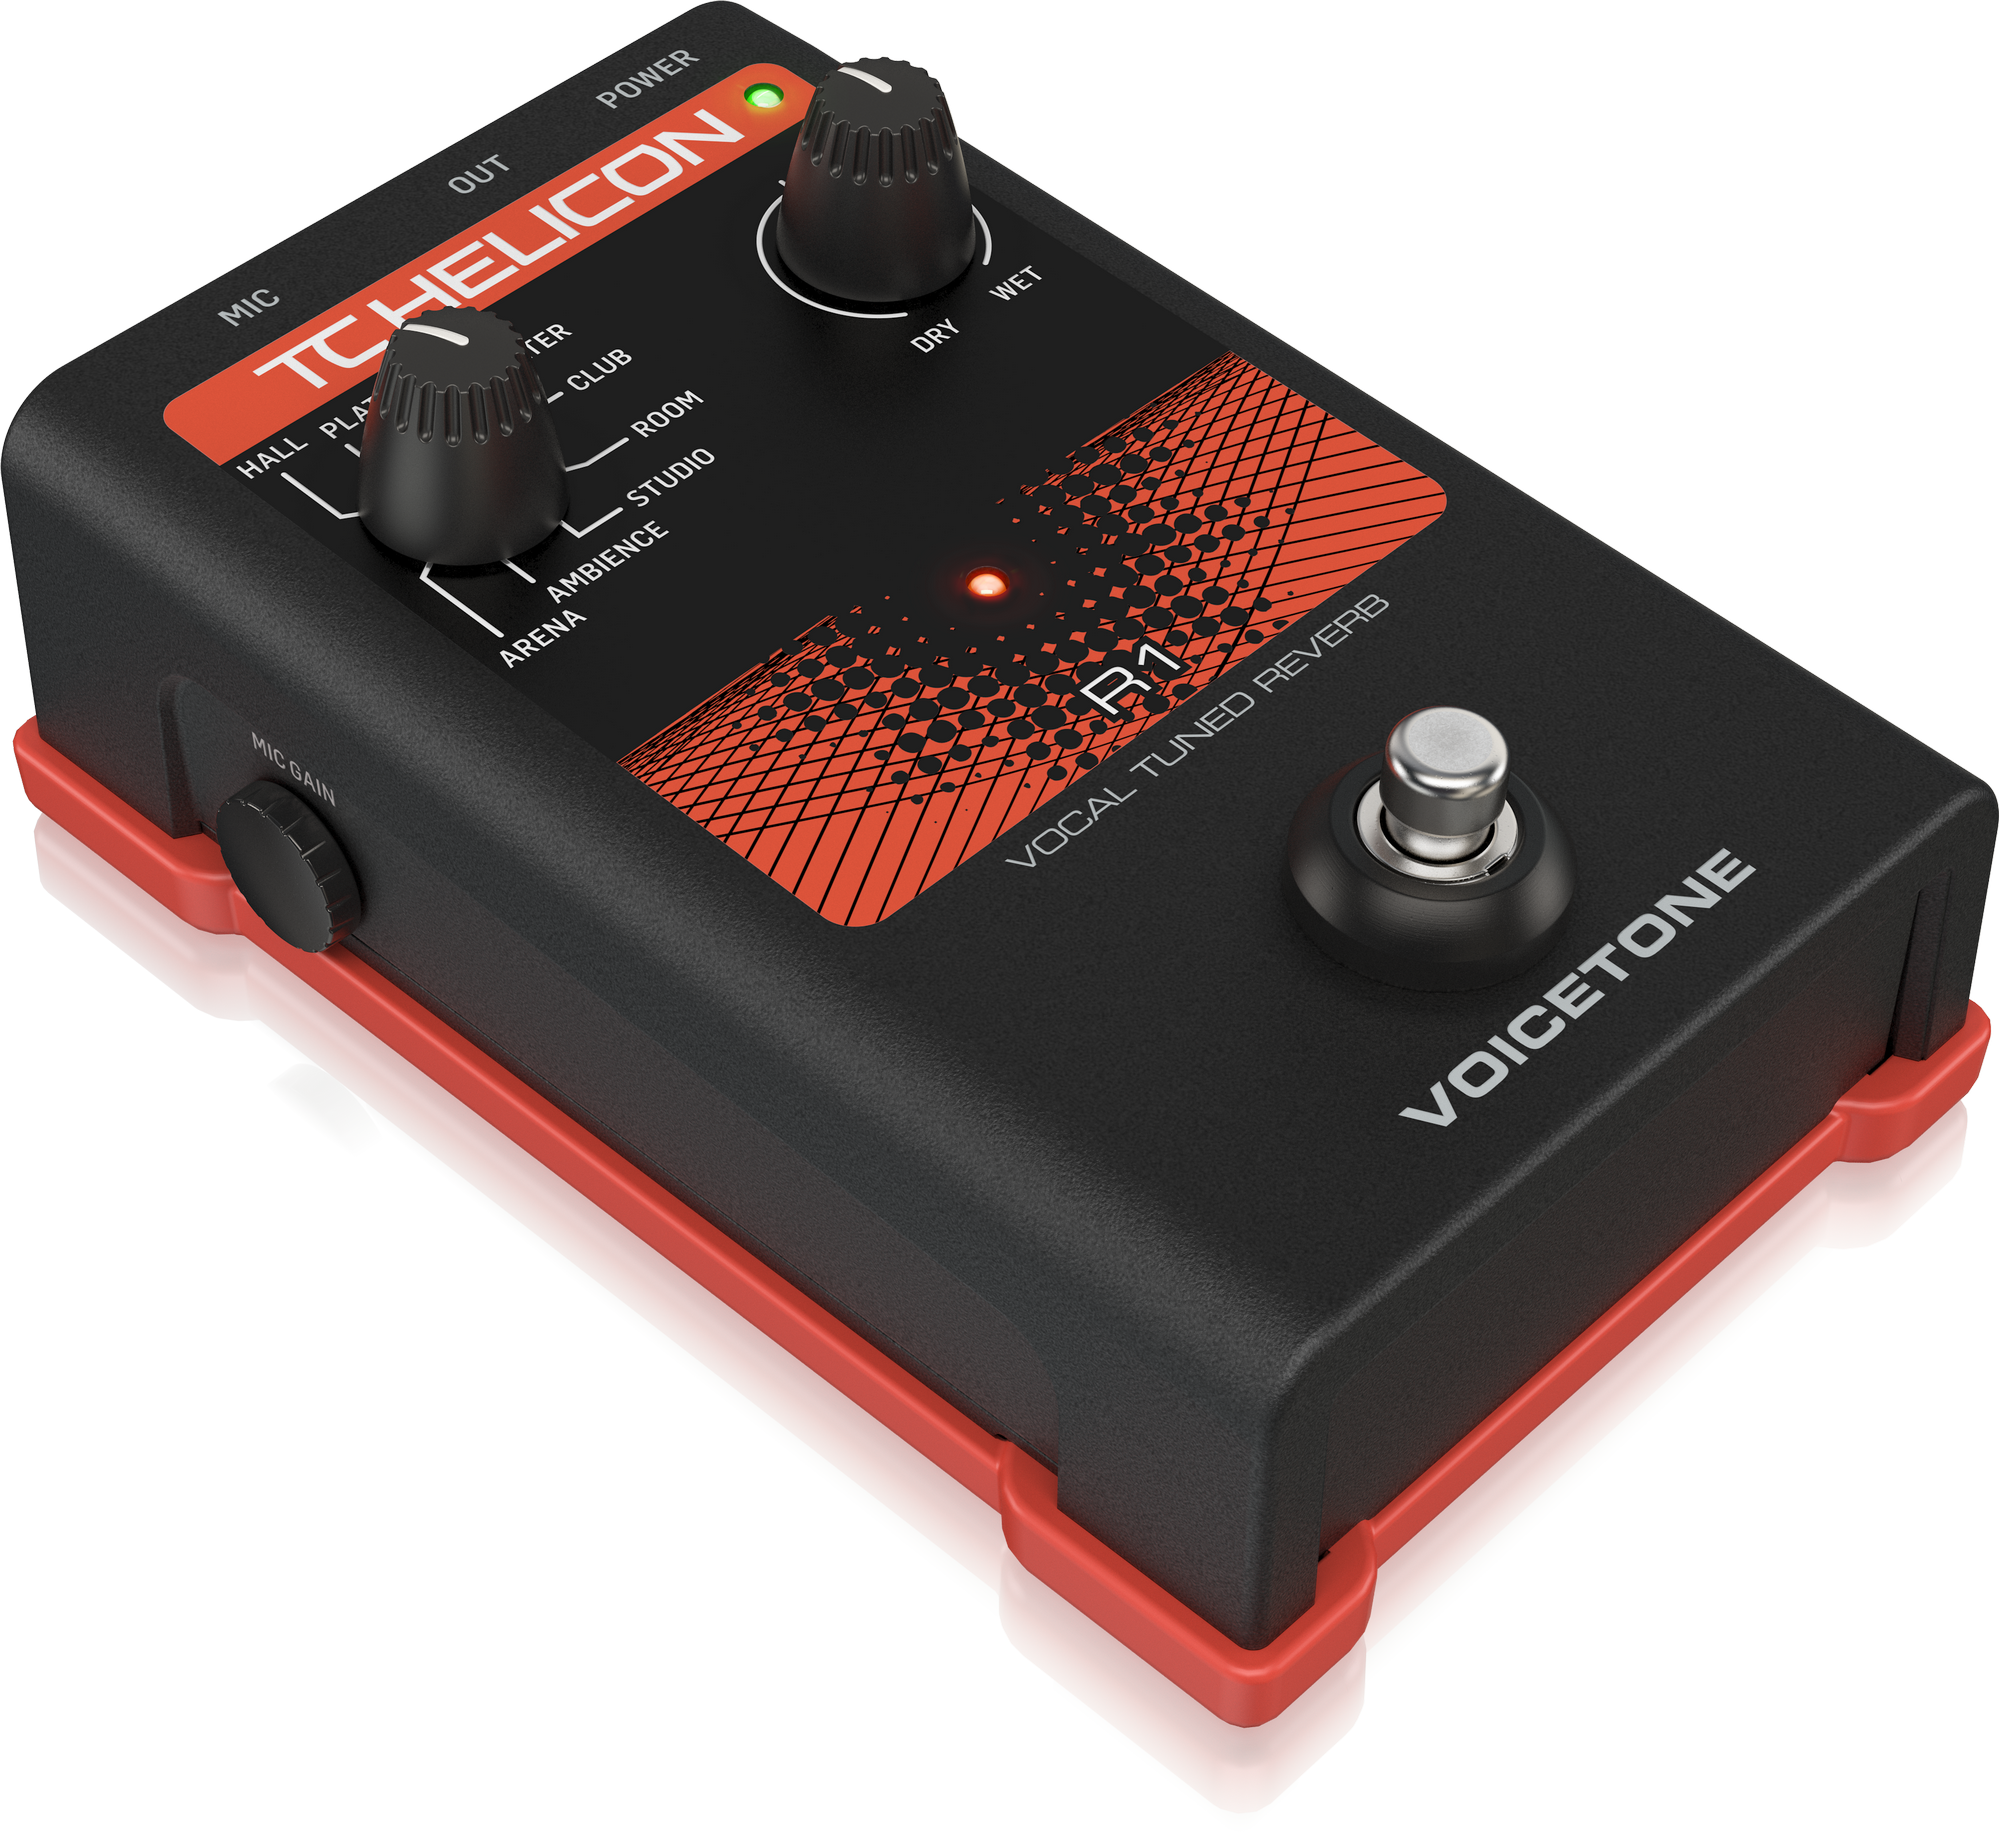 TC Helicon | Product | VOICETONE R1